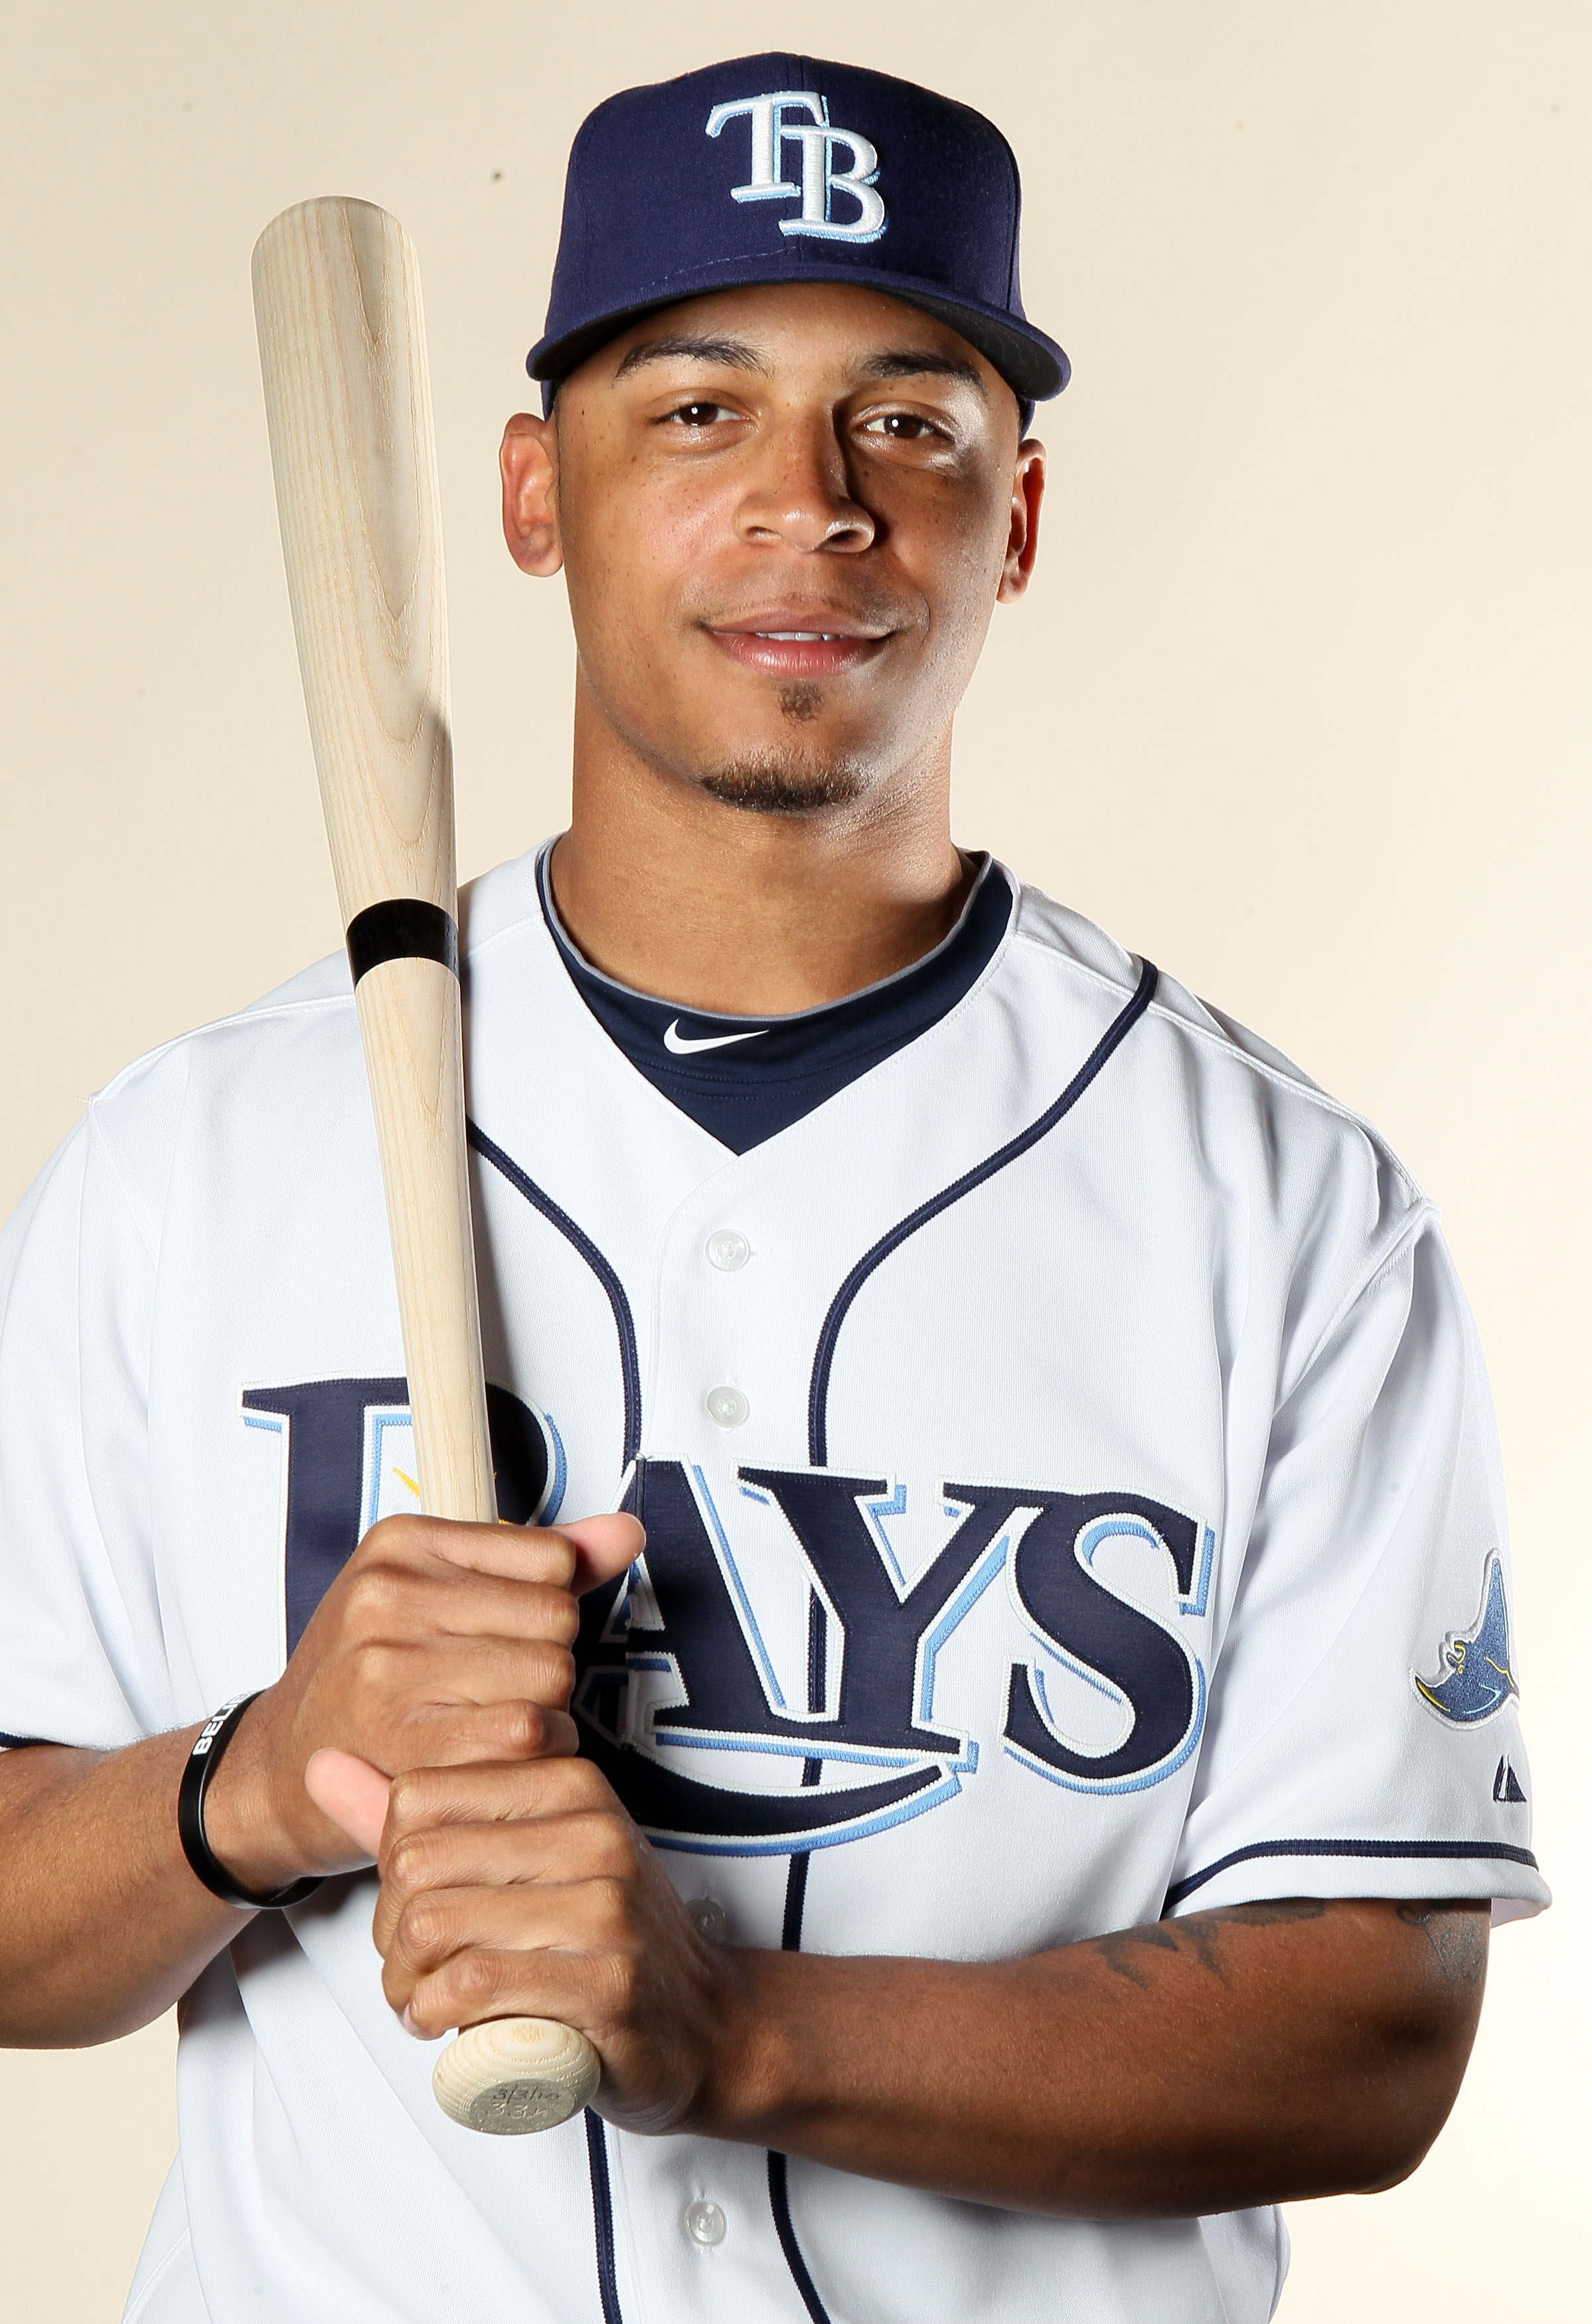 At 24, Desmond Jennings looks to make Rays fans forget all about Carl Crawford